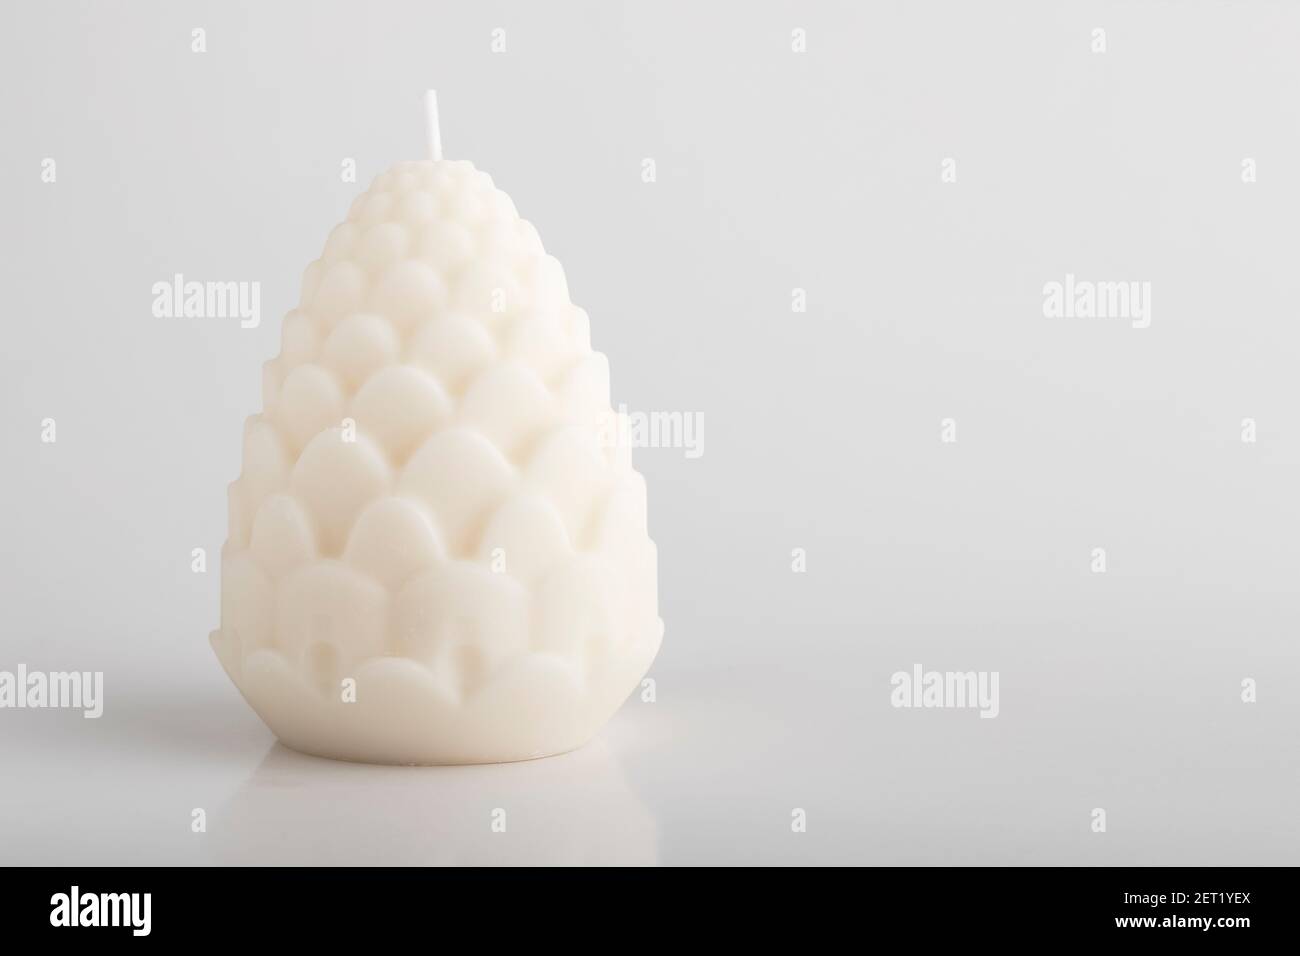 White soy wax flakes for candle making on a light gray marble background  Stock Photo - Alamy